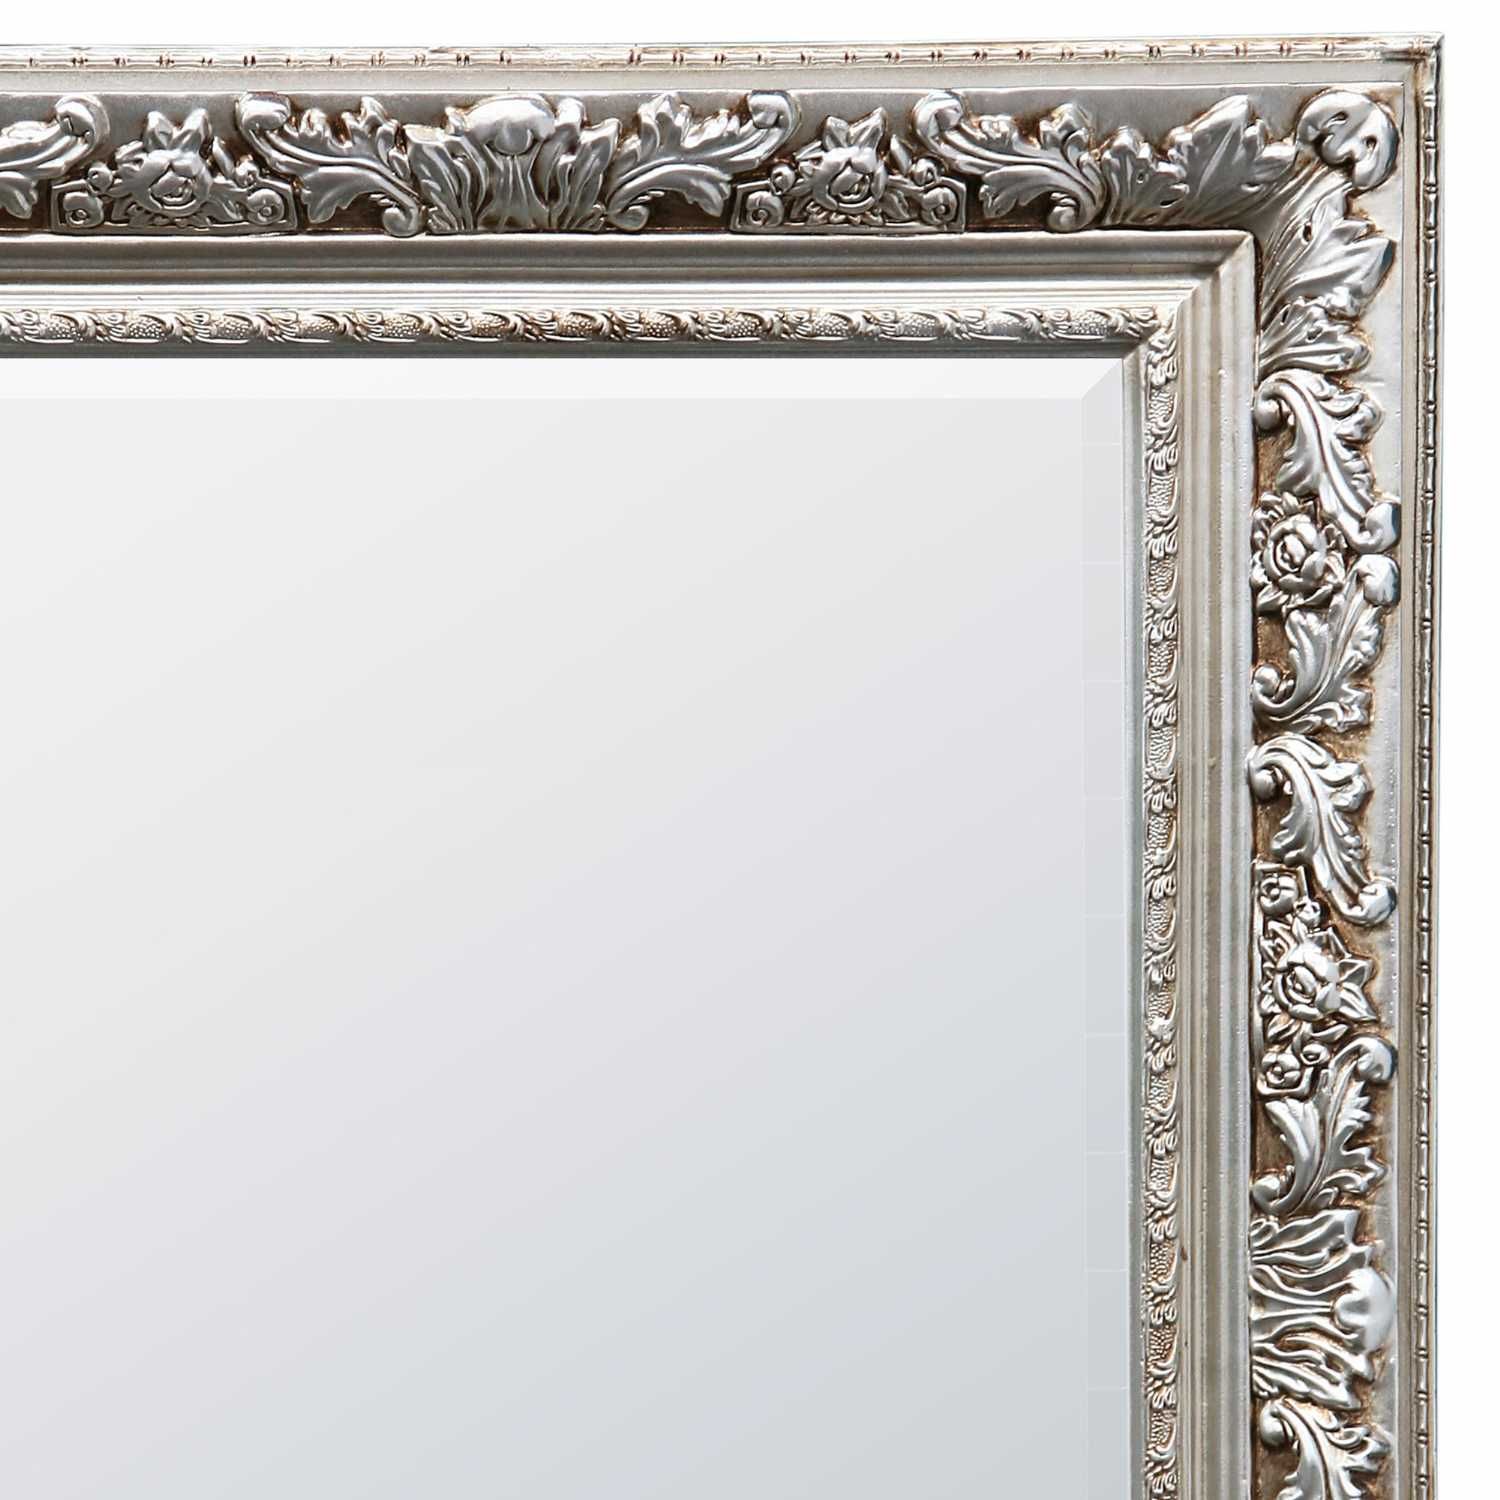 Antique Silver Decorative Leaf Design Framed Bevelled Wall Mirror With Butterfly Gold Leaf Wall Mirrors (View 12 of 15)